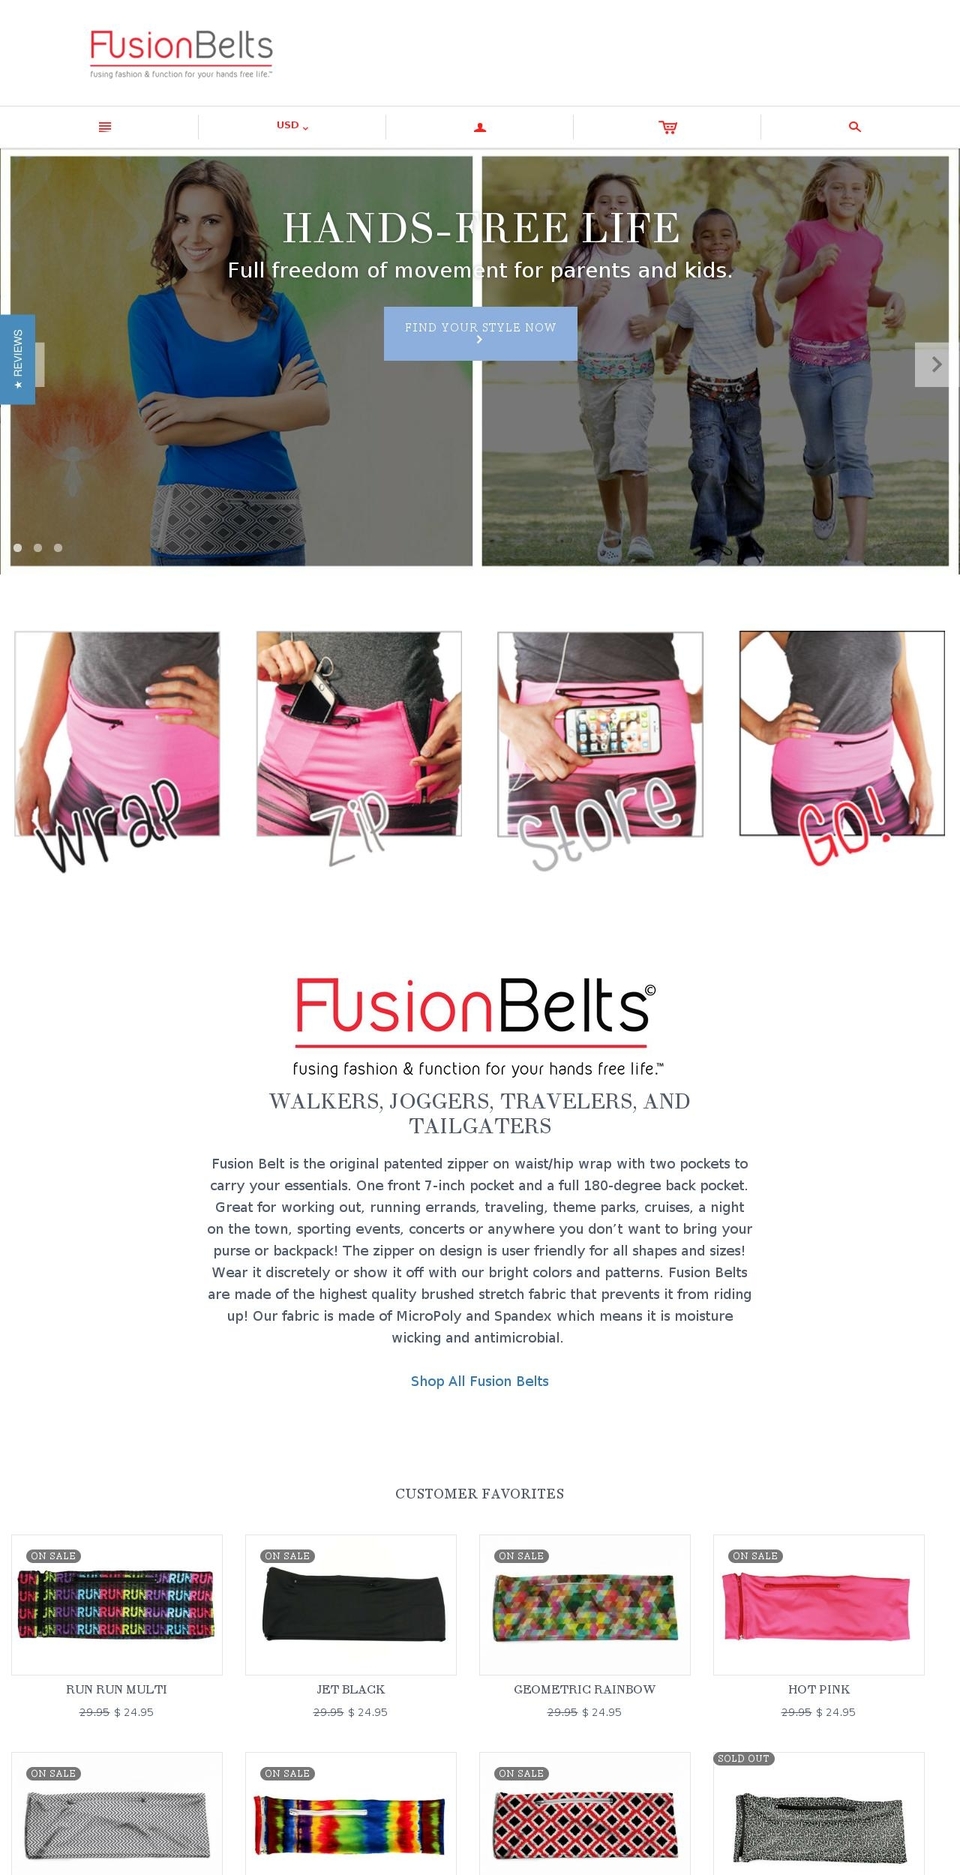 Fusion Belts - 08 May 2018 Shopify theme site example fusionbelt.com